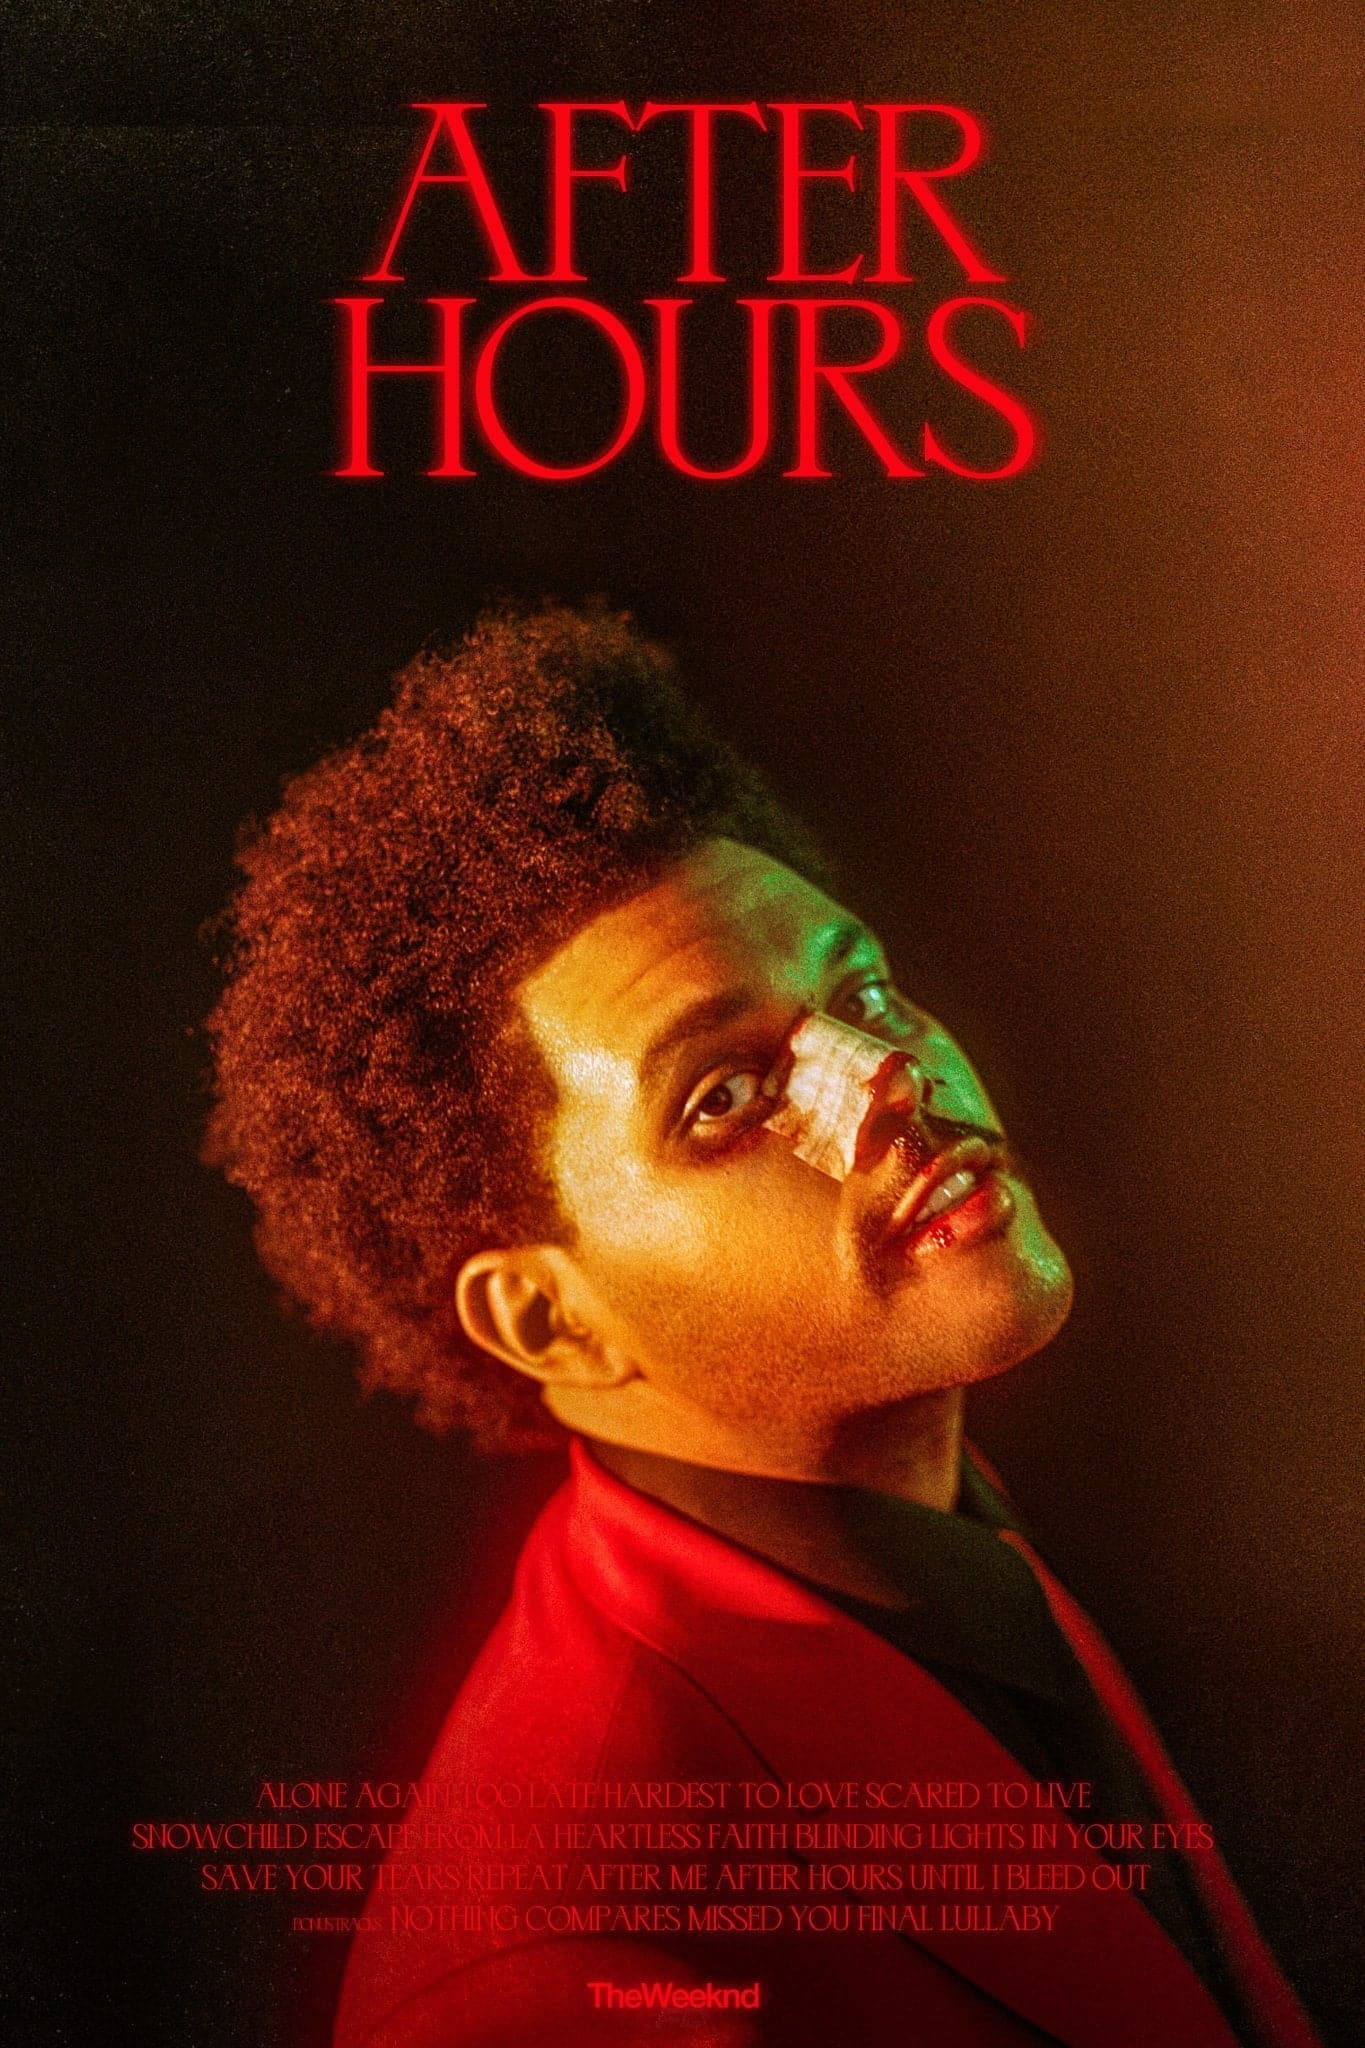 After Hours Minimalist Poster - The Weeknd  The weeknd, The weeknd poster,  Music poster design